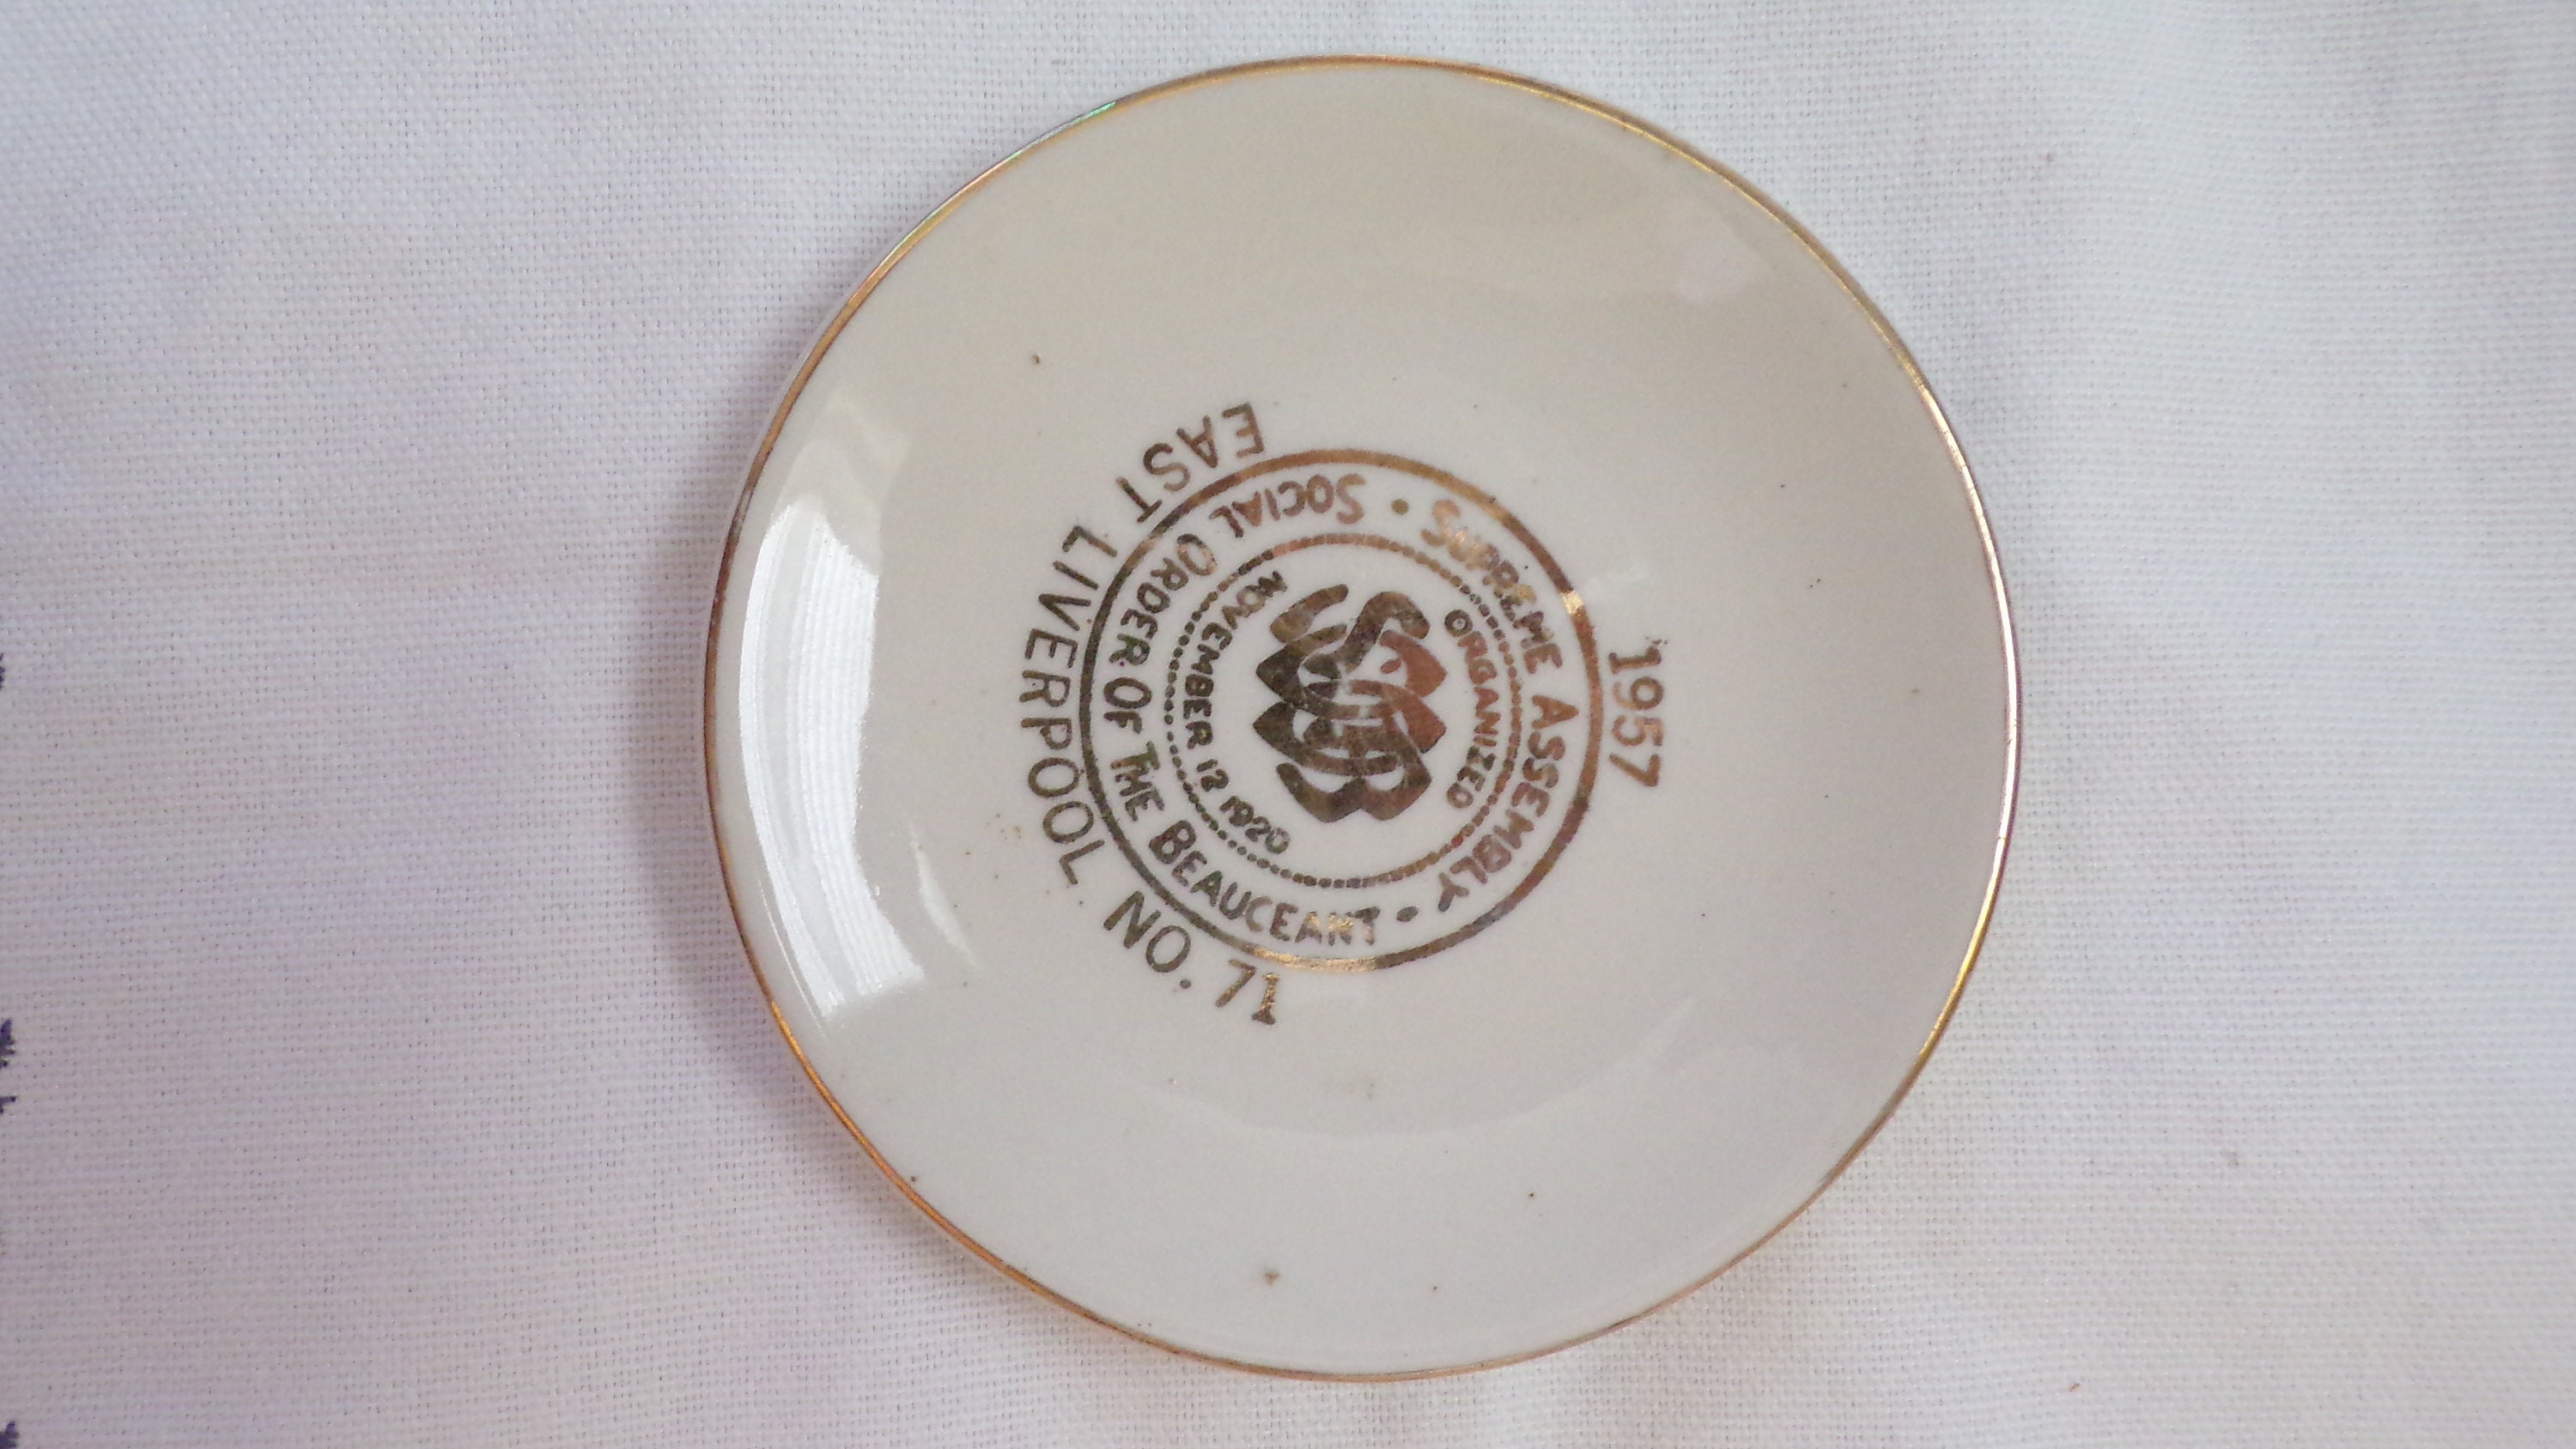 Social Order of the Beauceant Collector Plate - Etsy